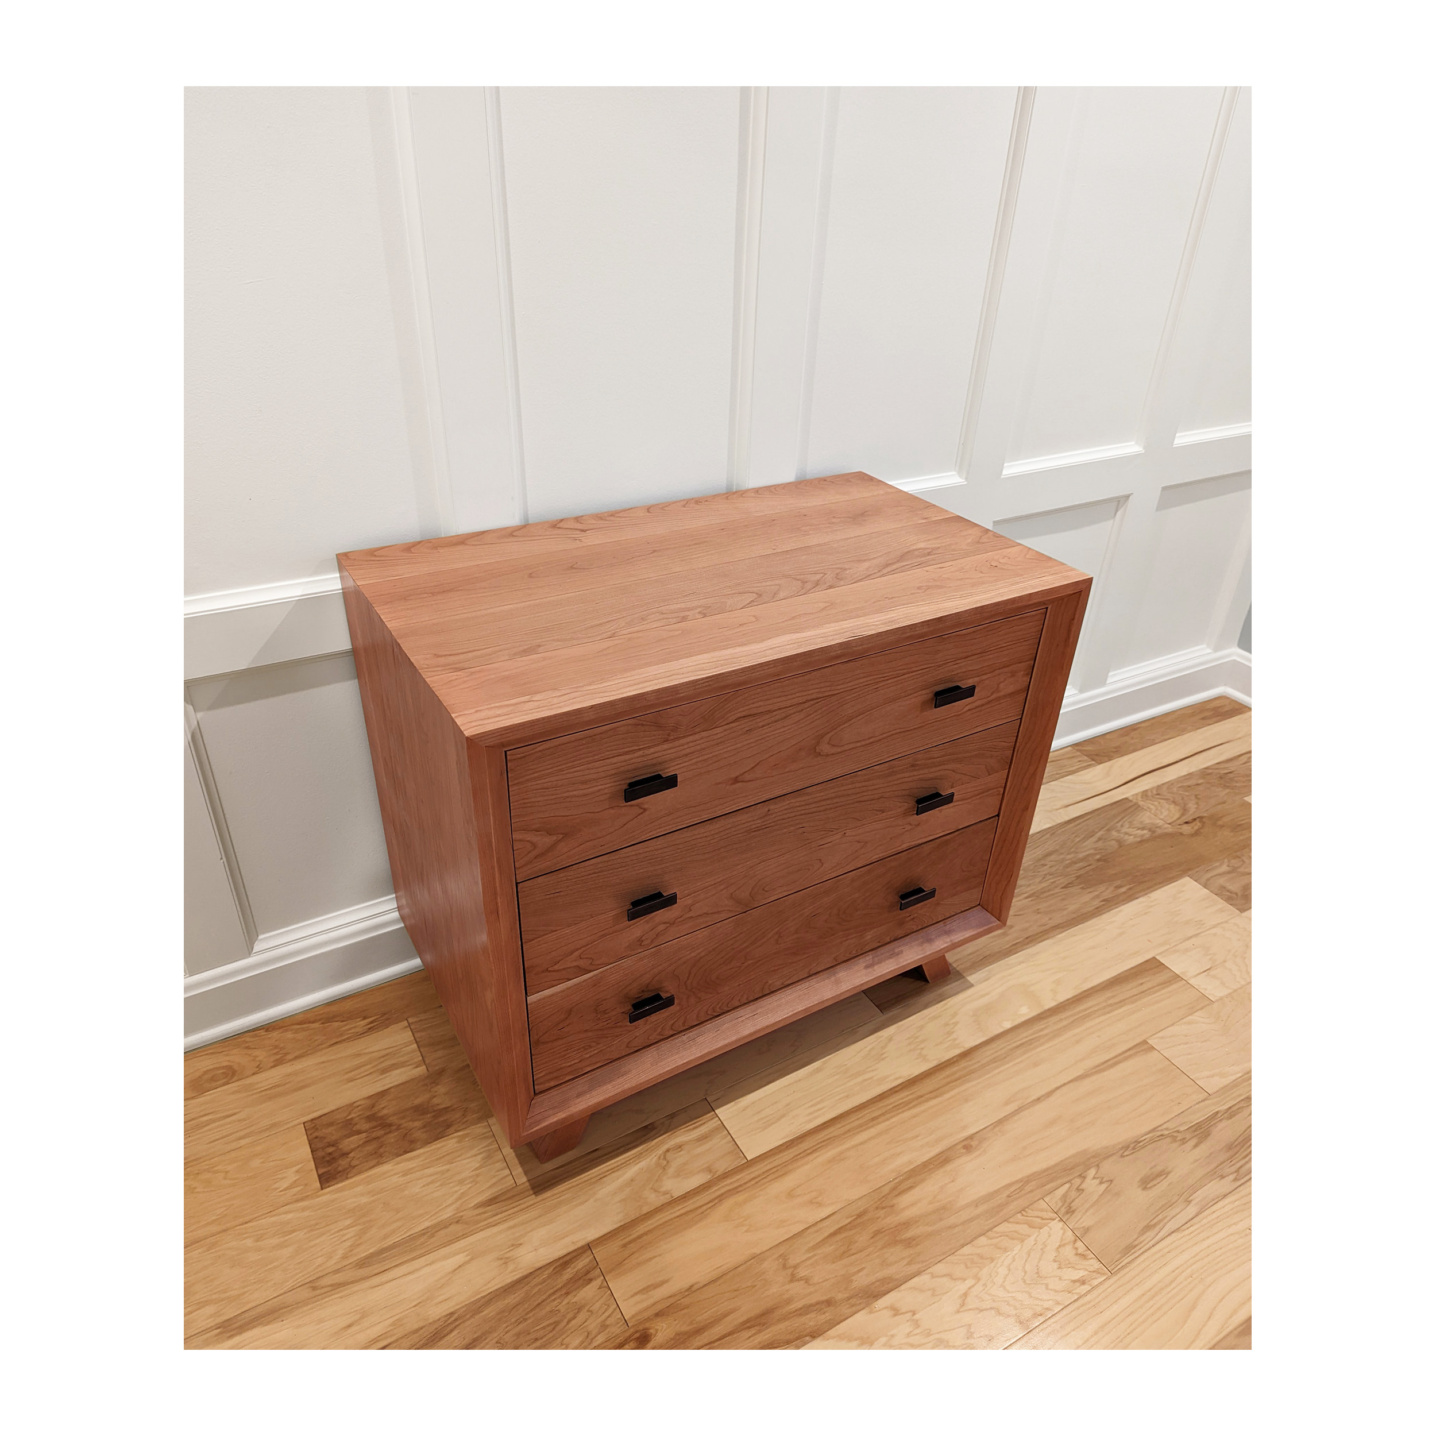 Modern Scandinavian Dresser made with solid cherry wood--Made by 57NorthPlank Tailored Modern Furniture